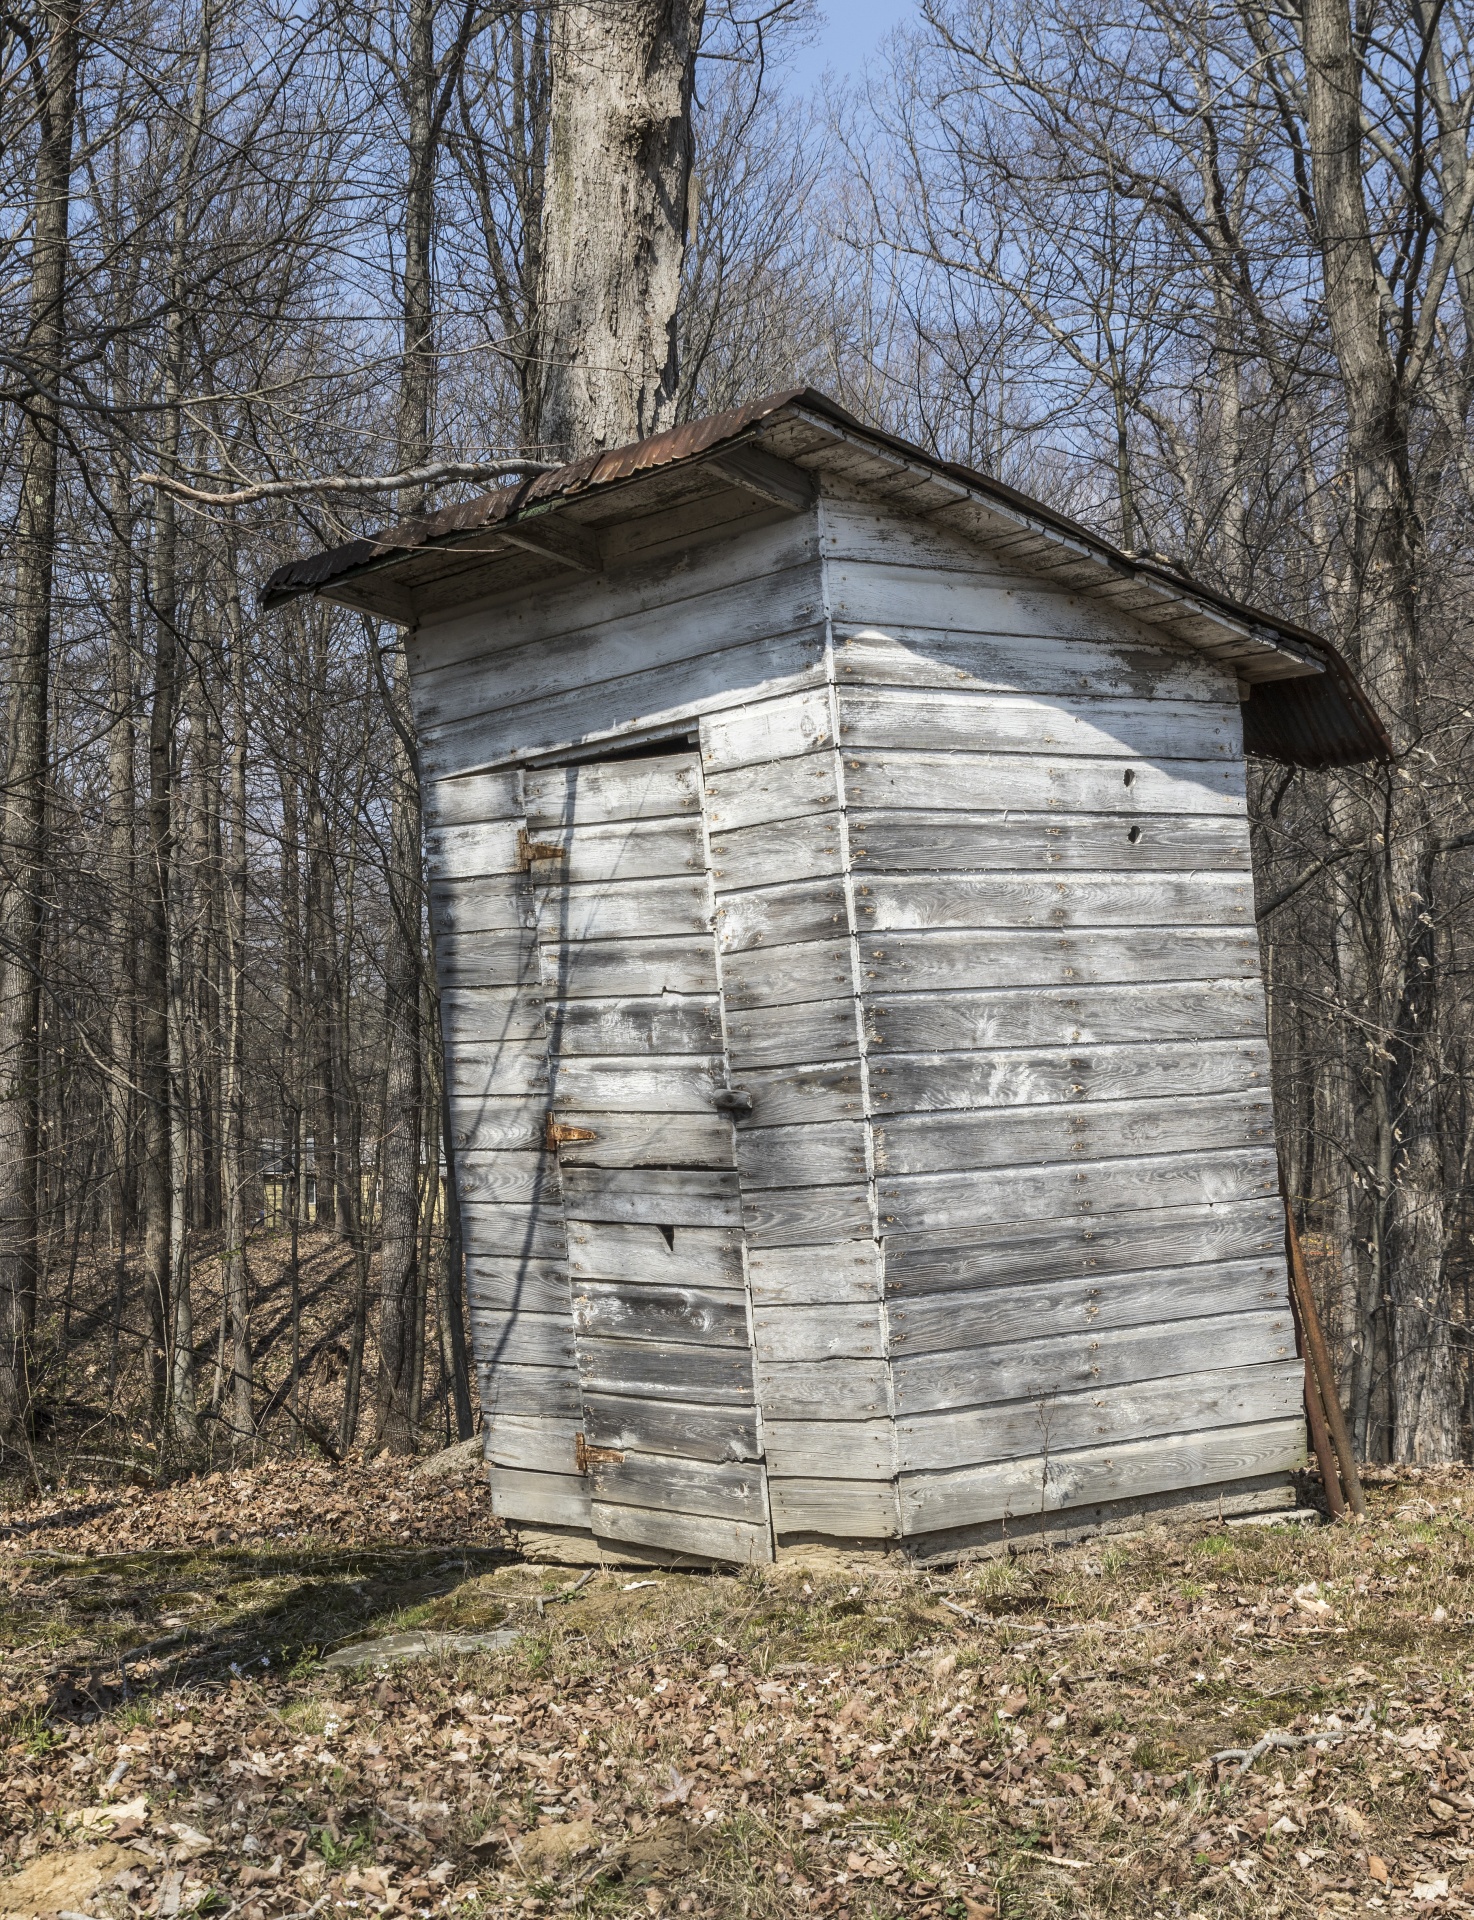 Outhouse house in Rural America